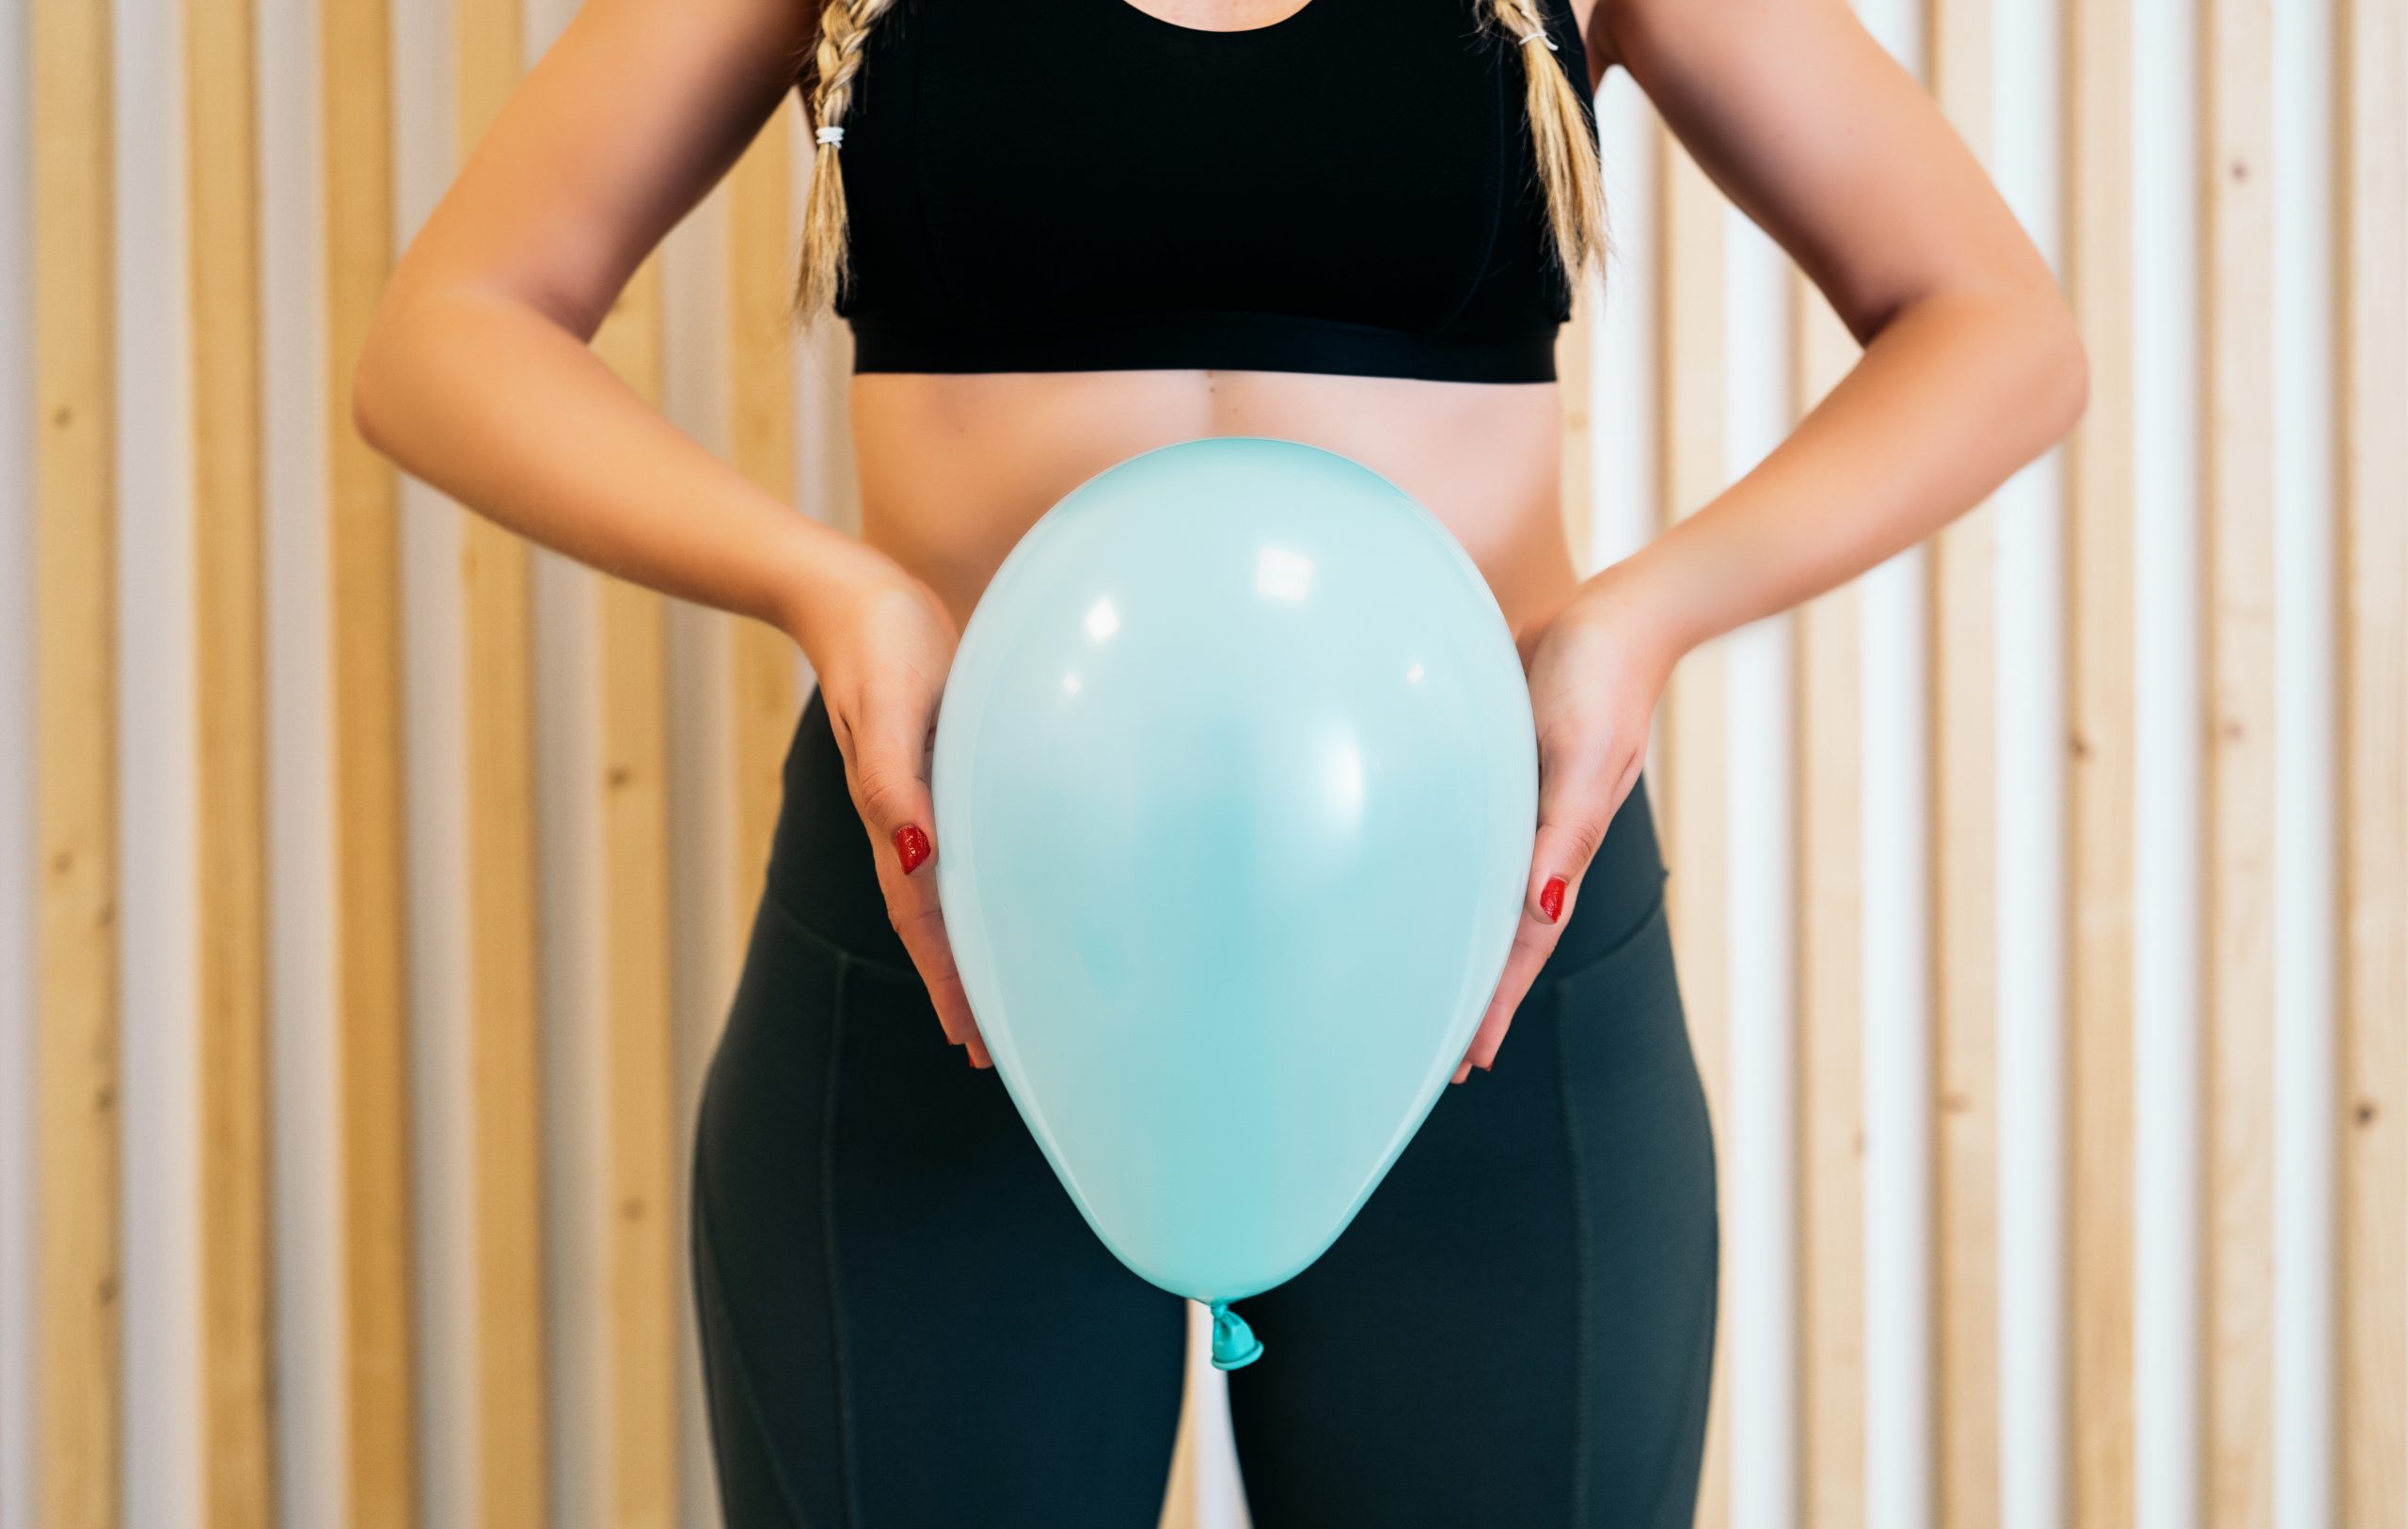 Why should we care about pelvic floor fitness?